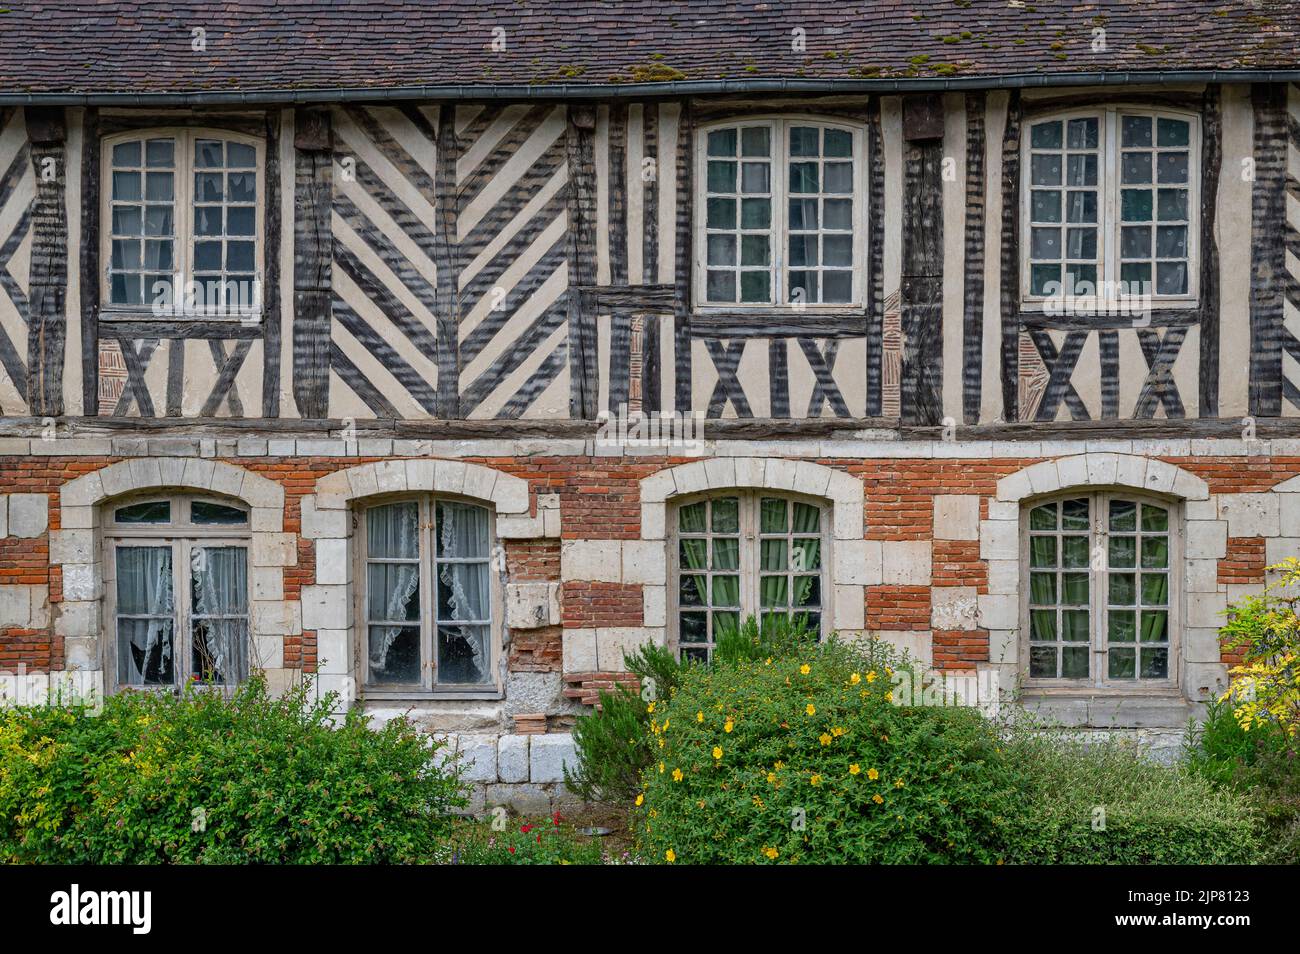 Half-timbered house make Le Bec-Hellouin in Normandy one of the plus beaux village de France, France's most beautiful villages Stock Photo